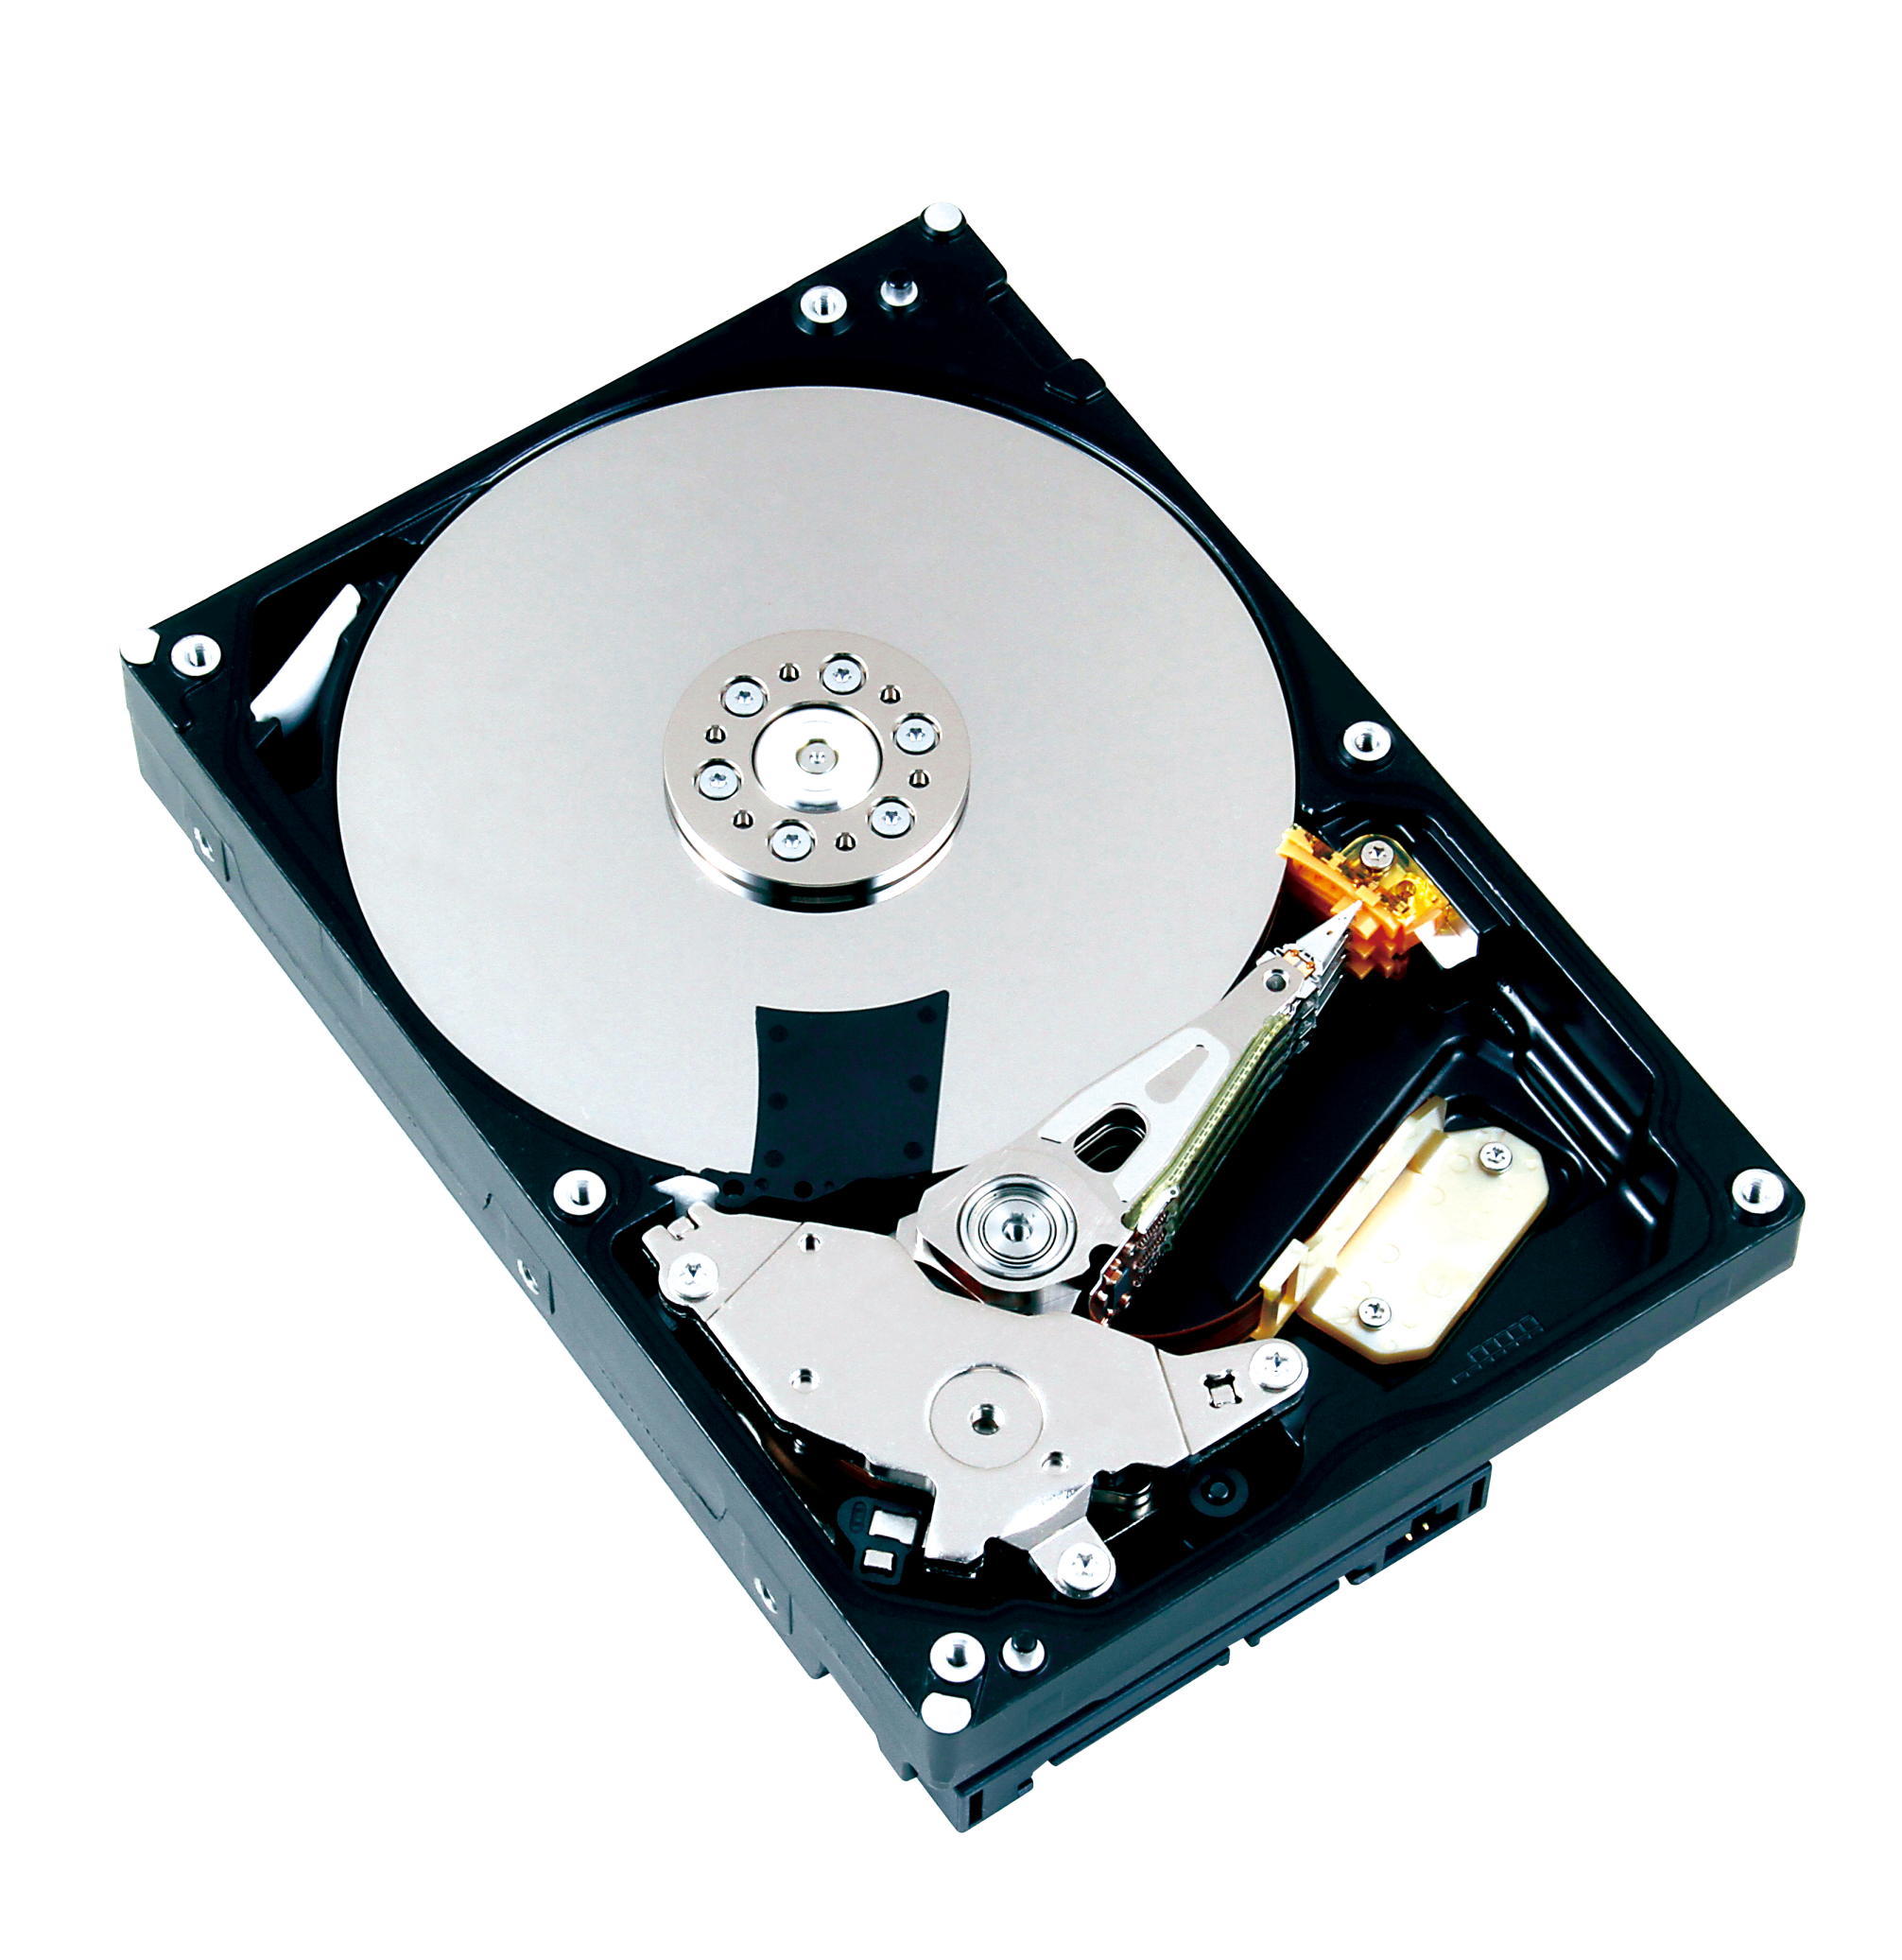 TOSHIBA 3.5" 1TB-6TB HDD - Buy Computers Online, Buy Servers, Buy Software Singapore